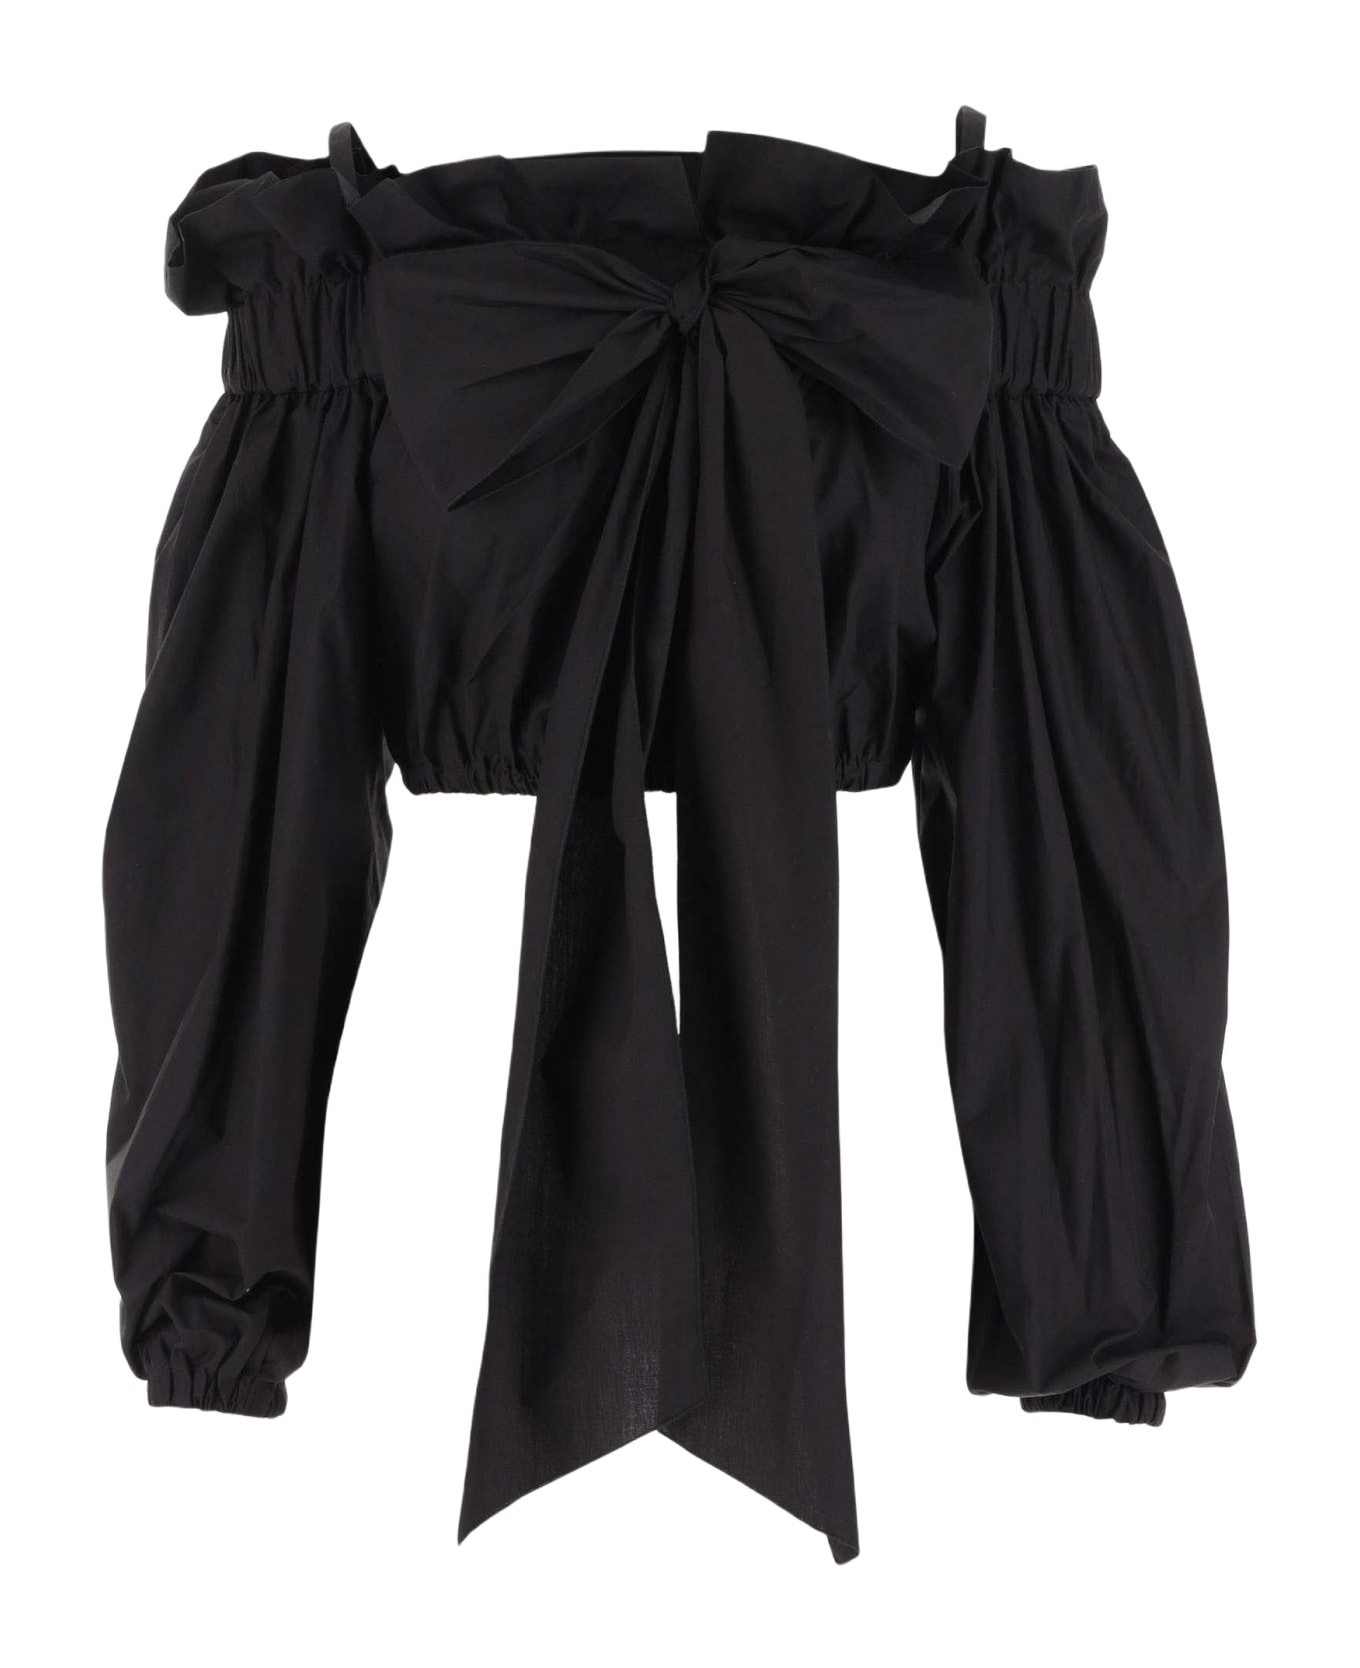 Patou Cotton Crop Top With Bow - Black タンクトップ